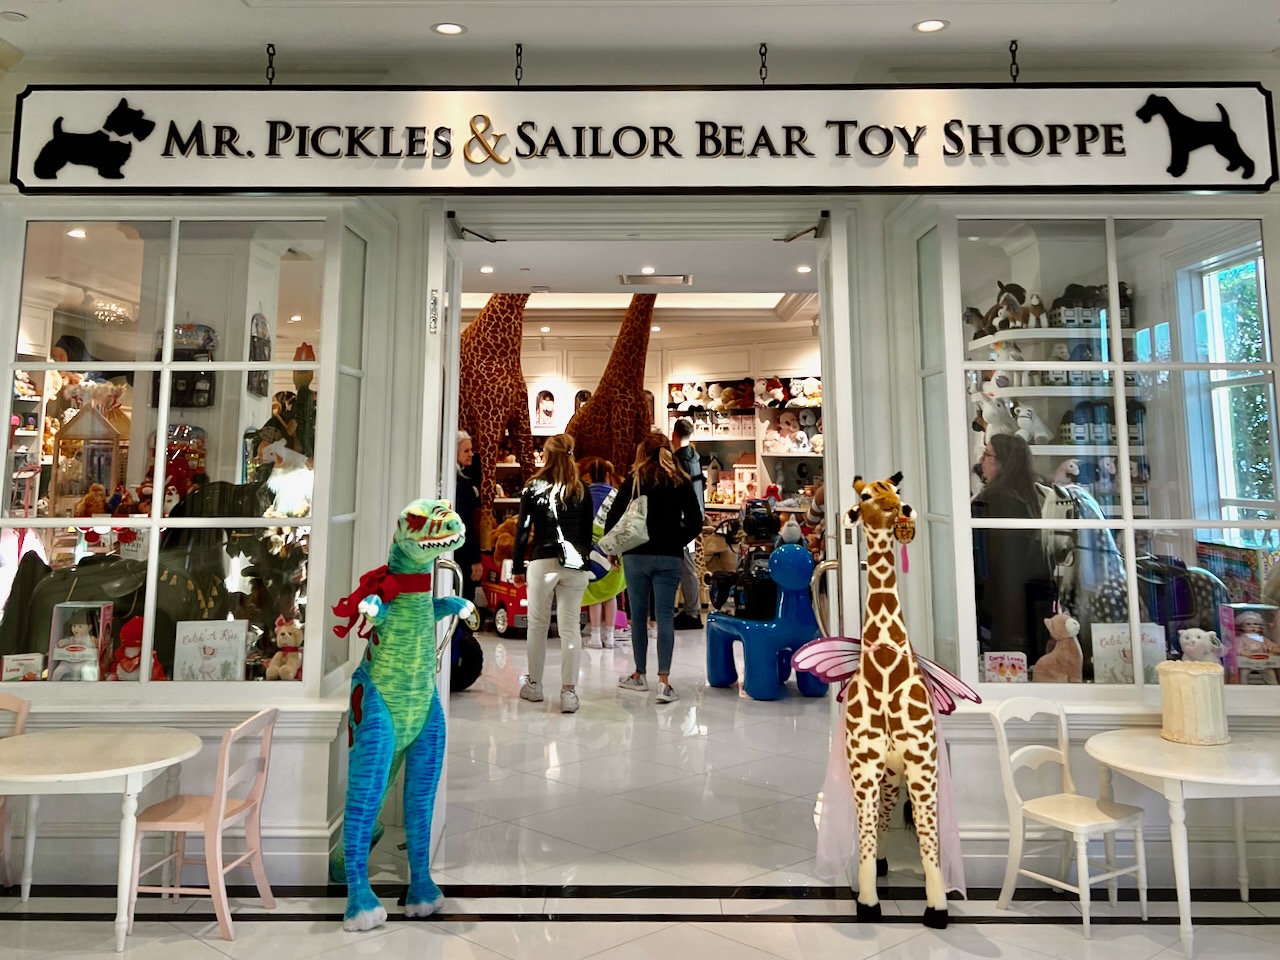 Exterior photo of the Mr Pickles and Sailor Bear Toy Shoppe